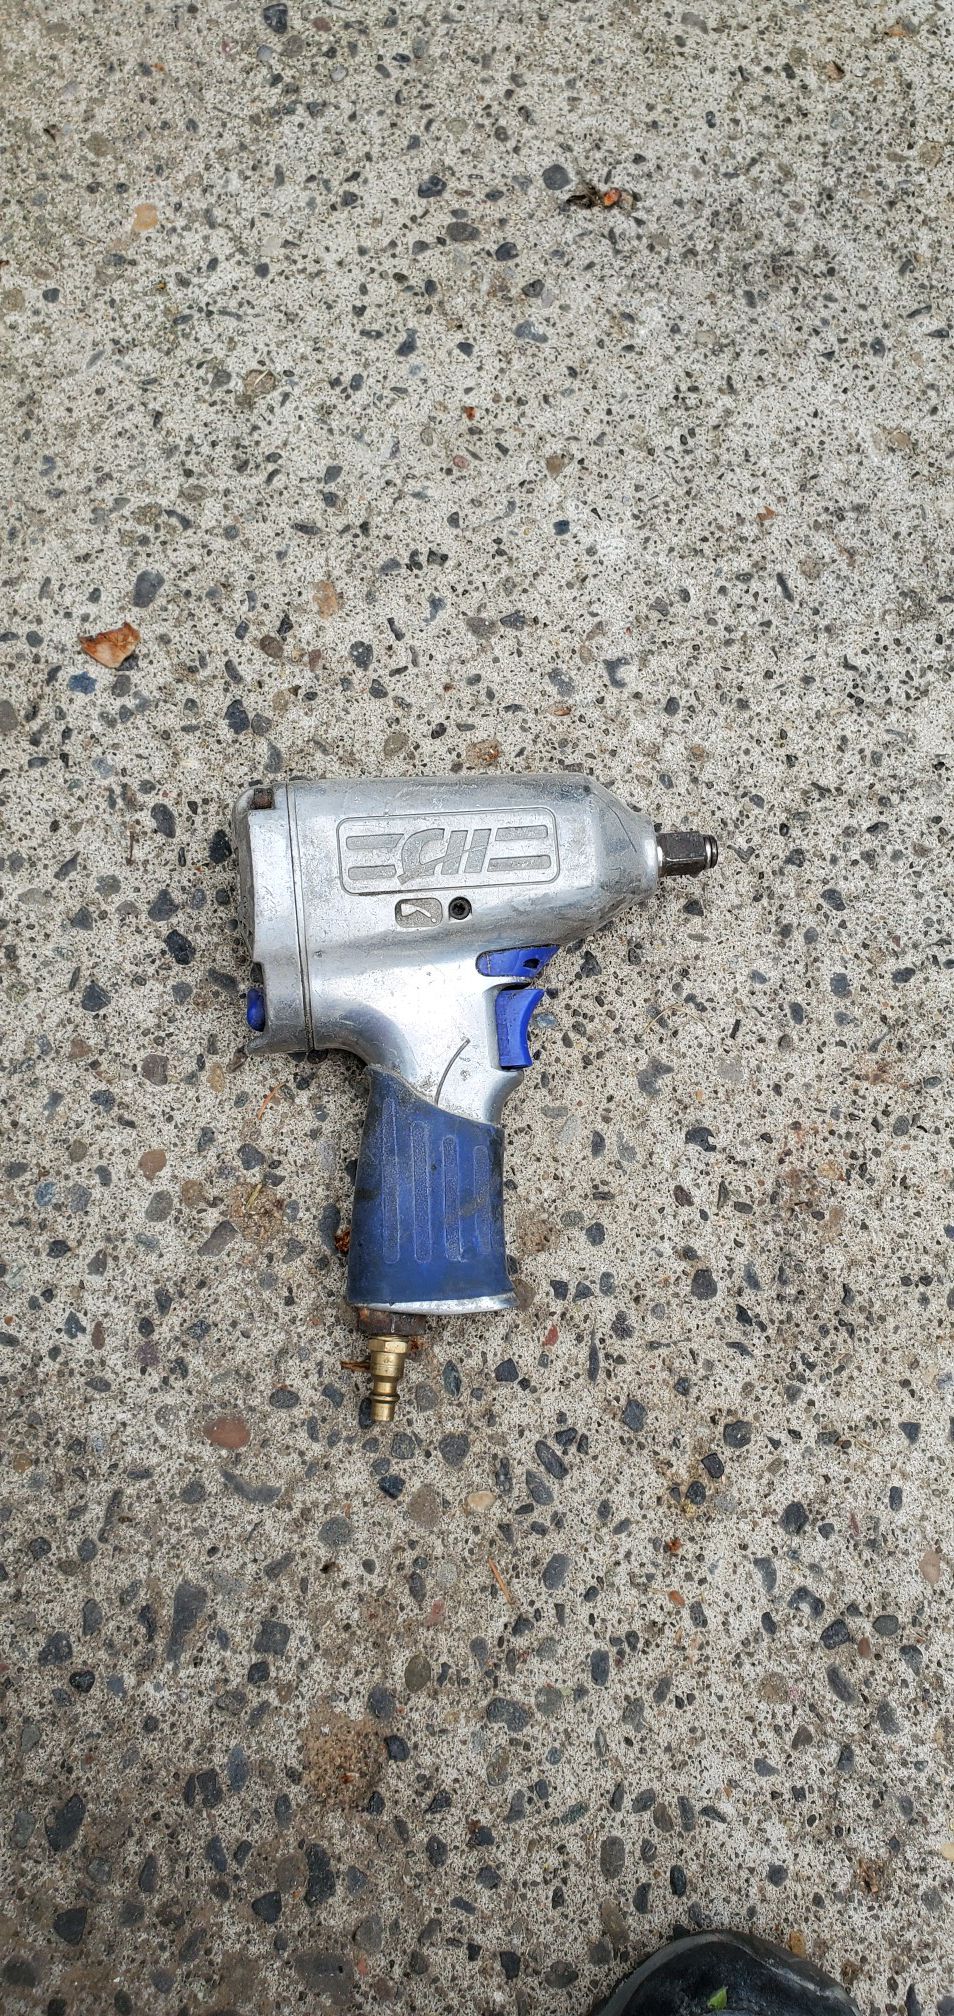 1/2 impact wrench